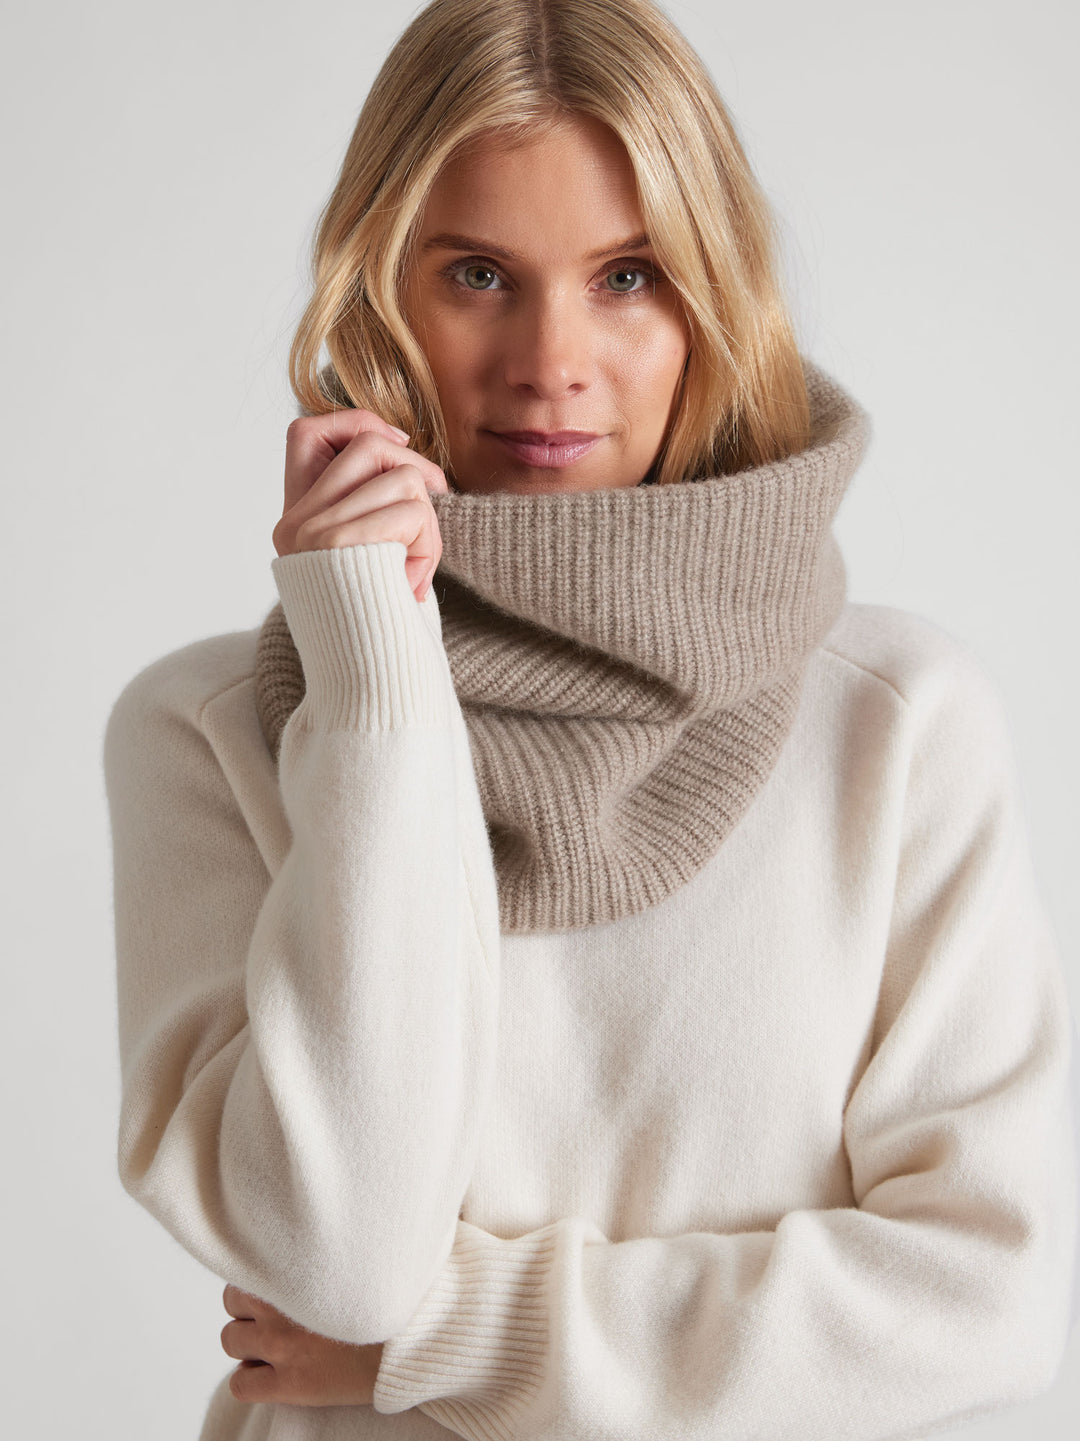 Rib knitted cashmere snood / scarf "Erika" in 100% pure cashmere. Scandinavian design by Kashmina. Color: Toast.